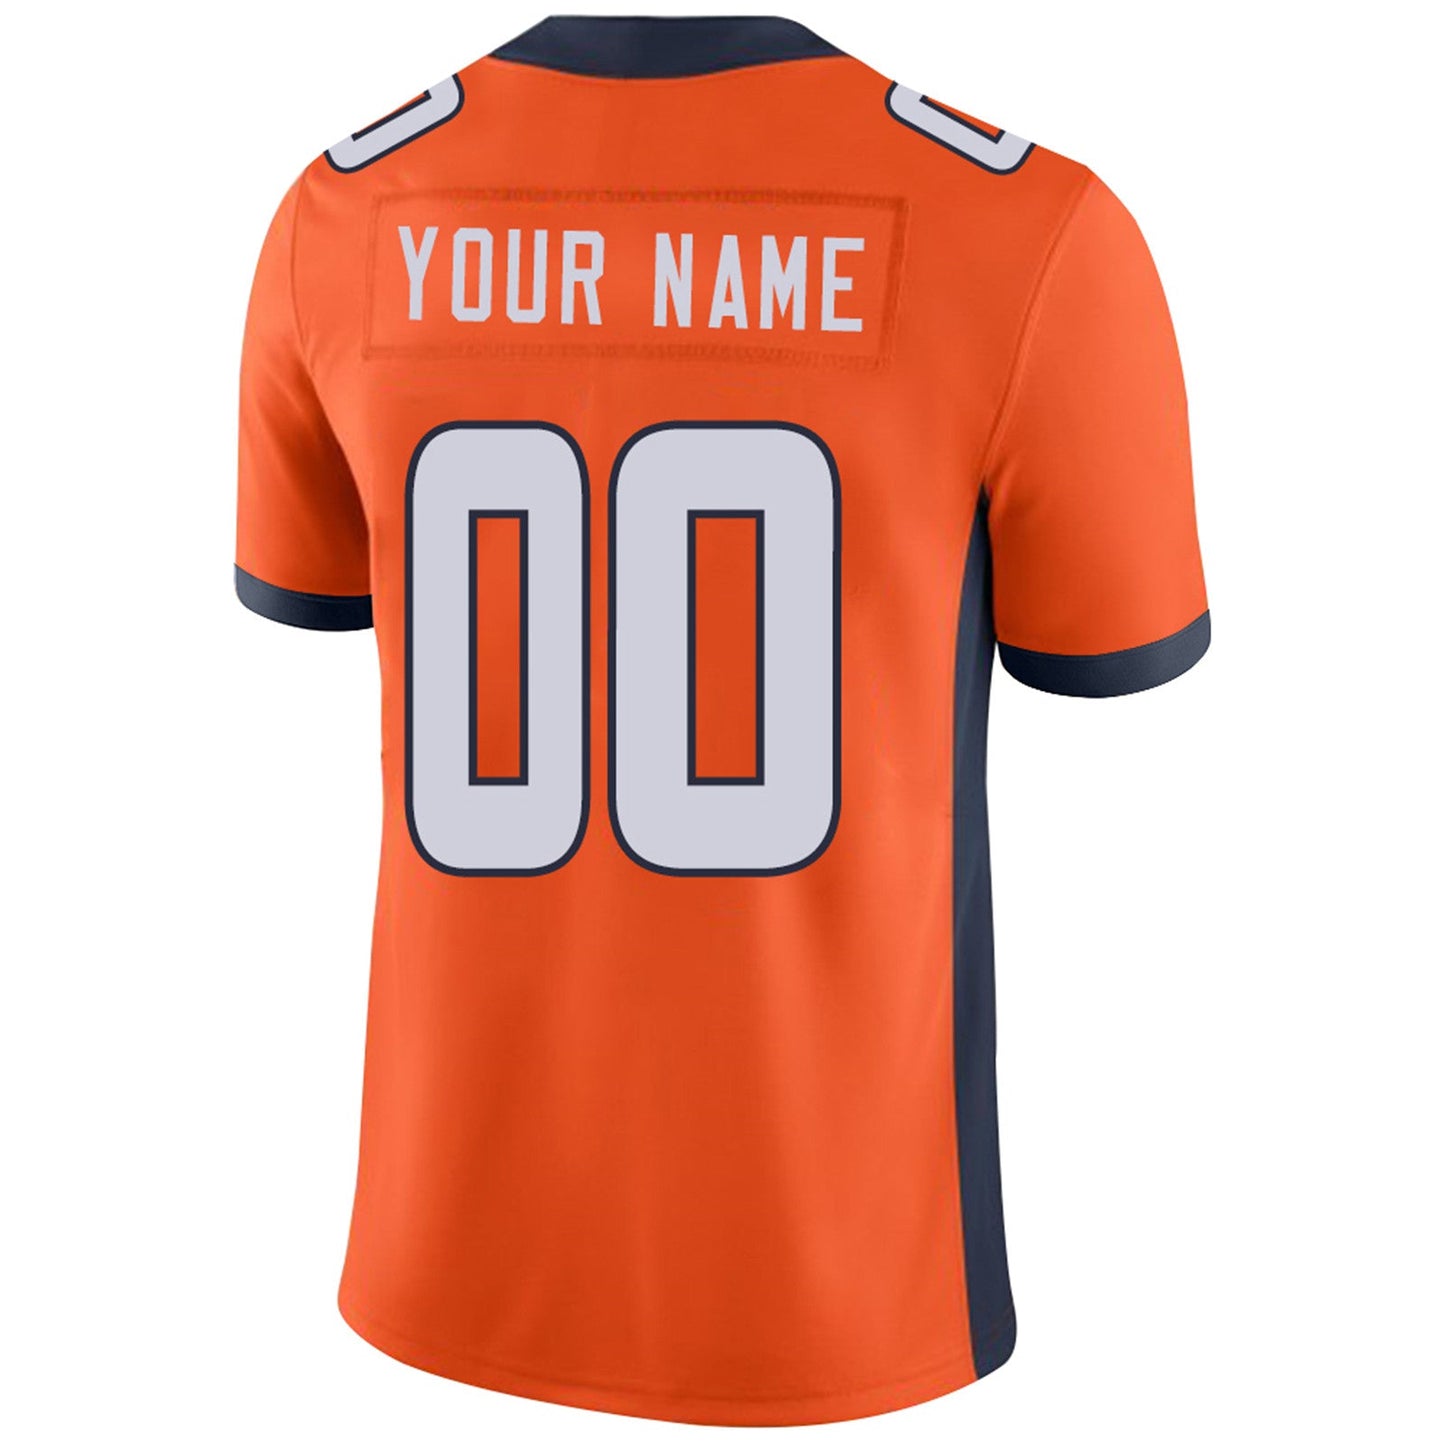 Custom D.Broncos Football Jerseys Team Player or Personalized Design Your Own Name for Men's Women's Youth Jerseys Orange